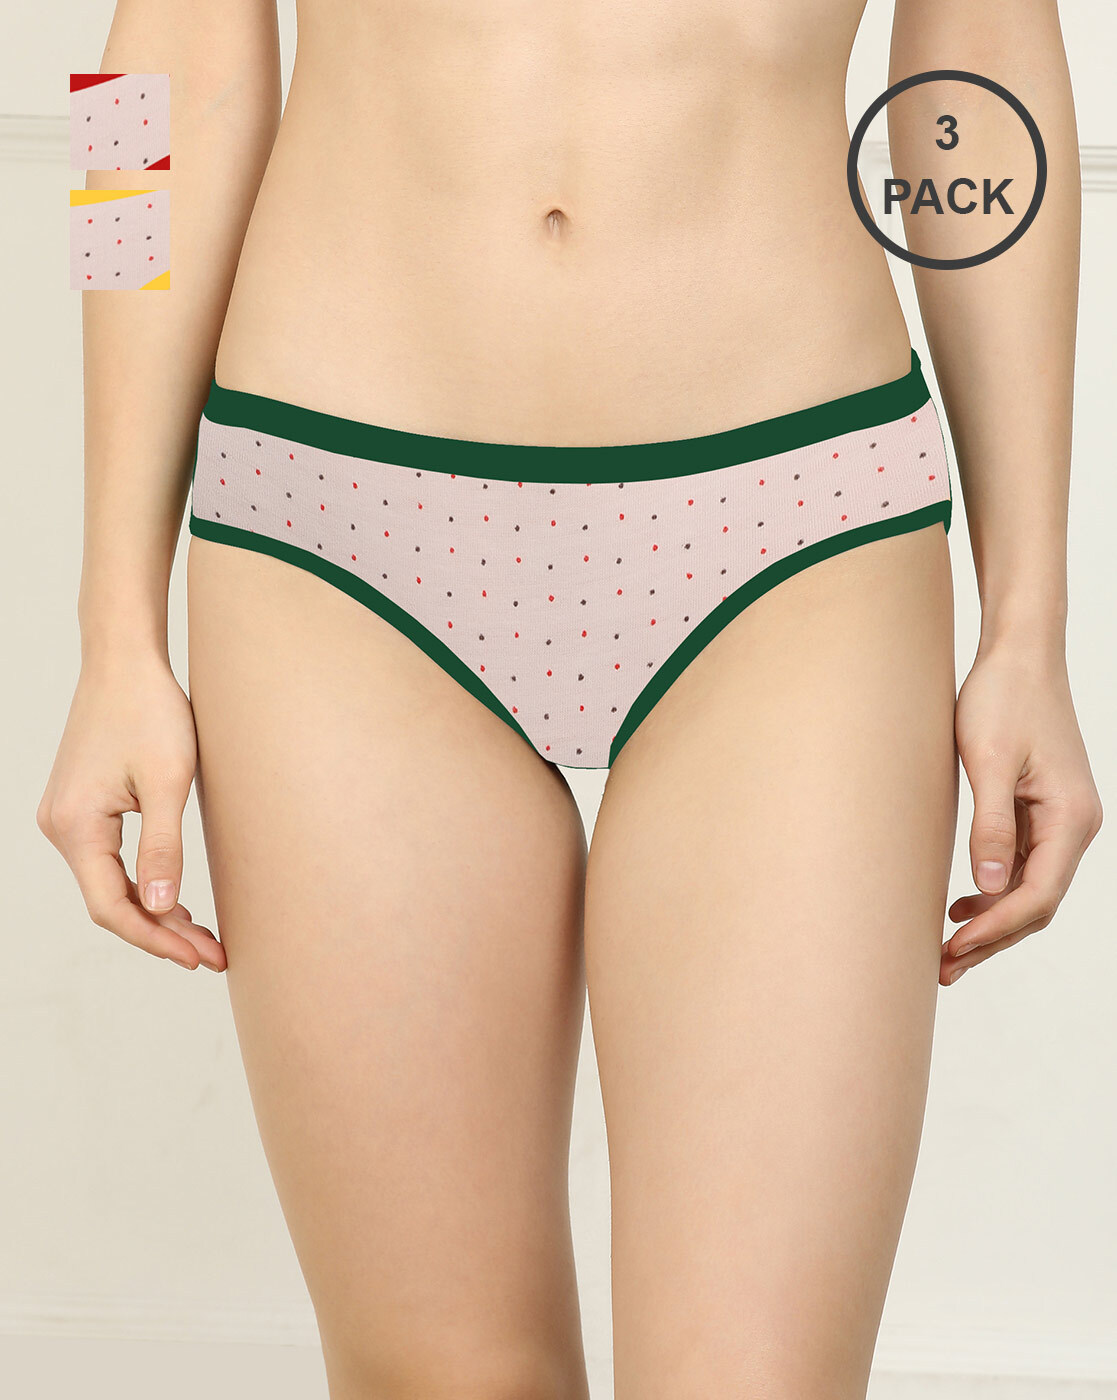 Buy Multicoloured Panties for Women by Arousy Online